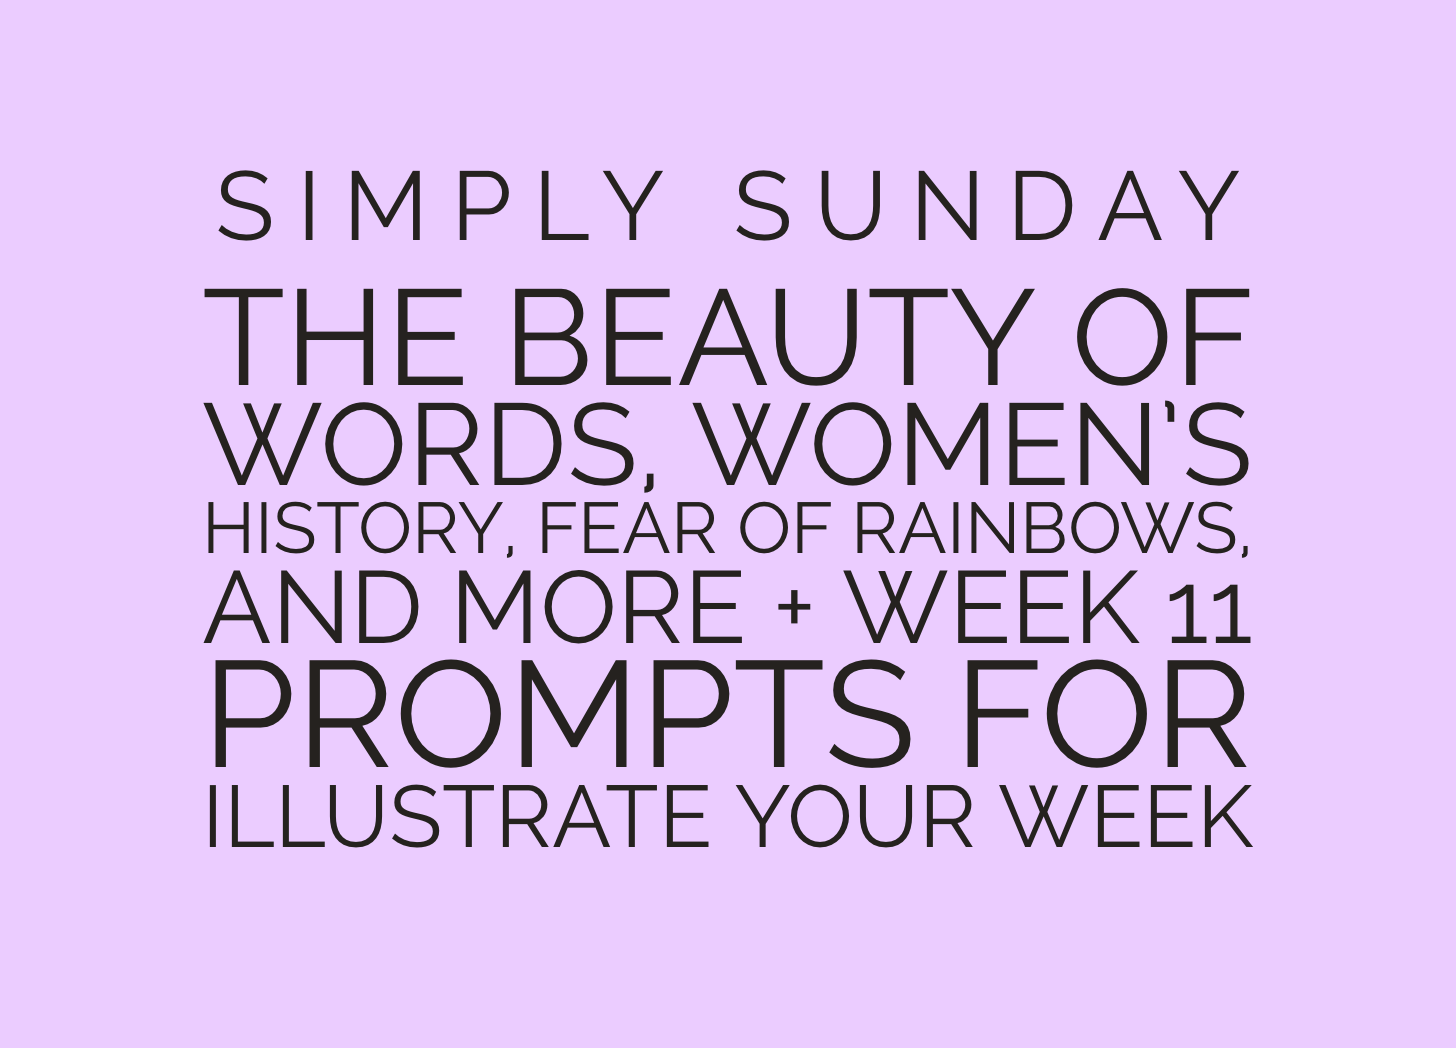 Simply Sunday: Beautiful words, Women's History, Fear of Rainbows, and More + Week 11 Prompts for Illustrate Your Week